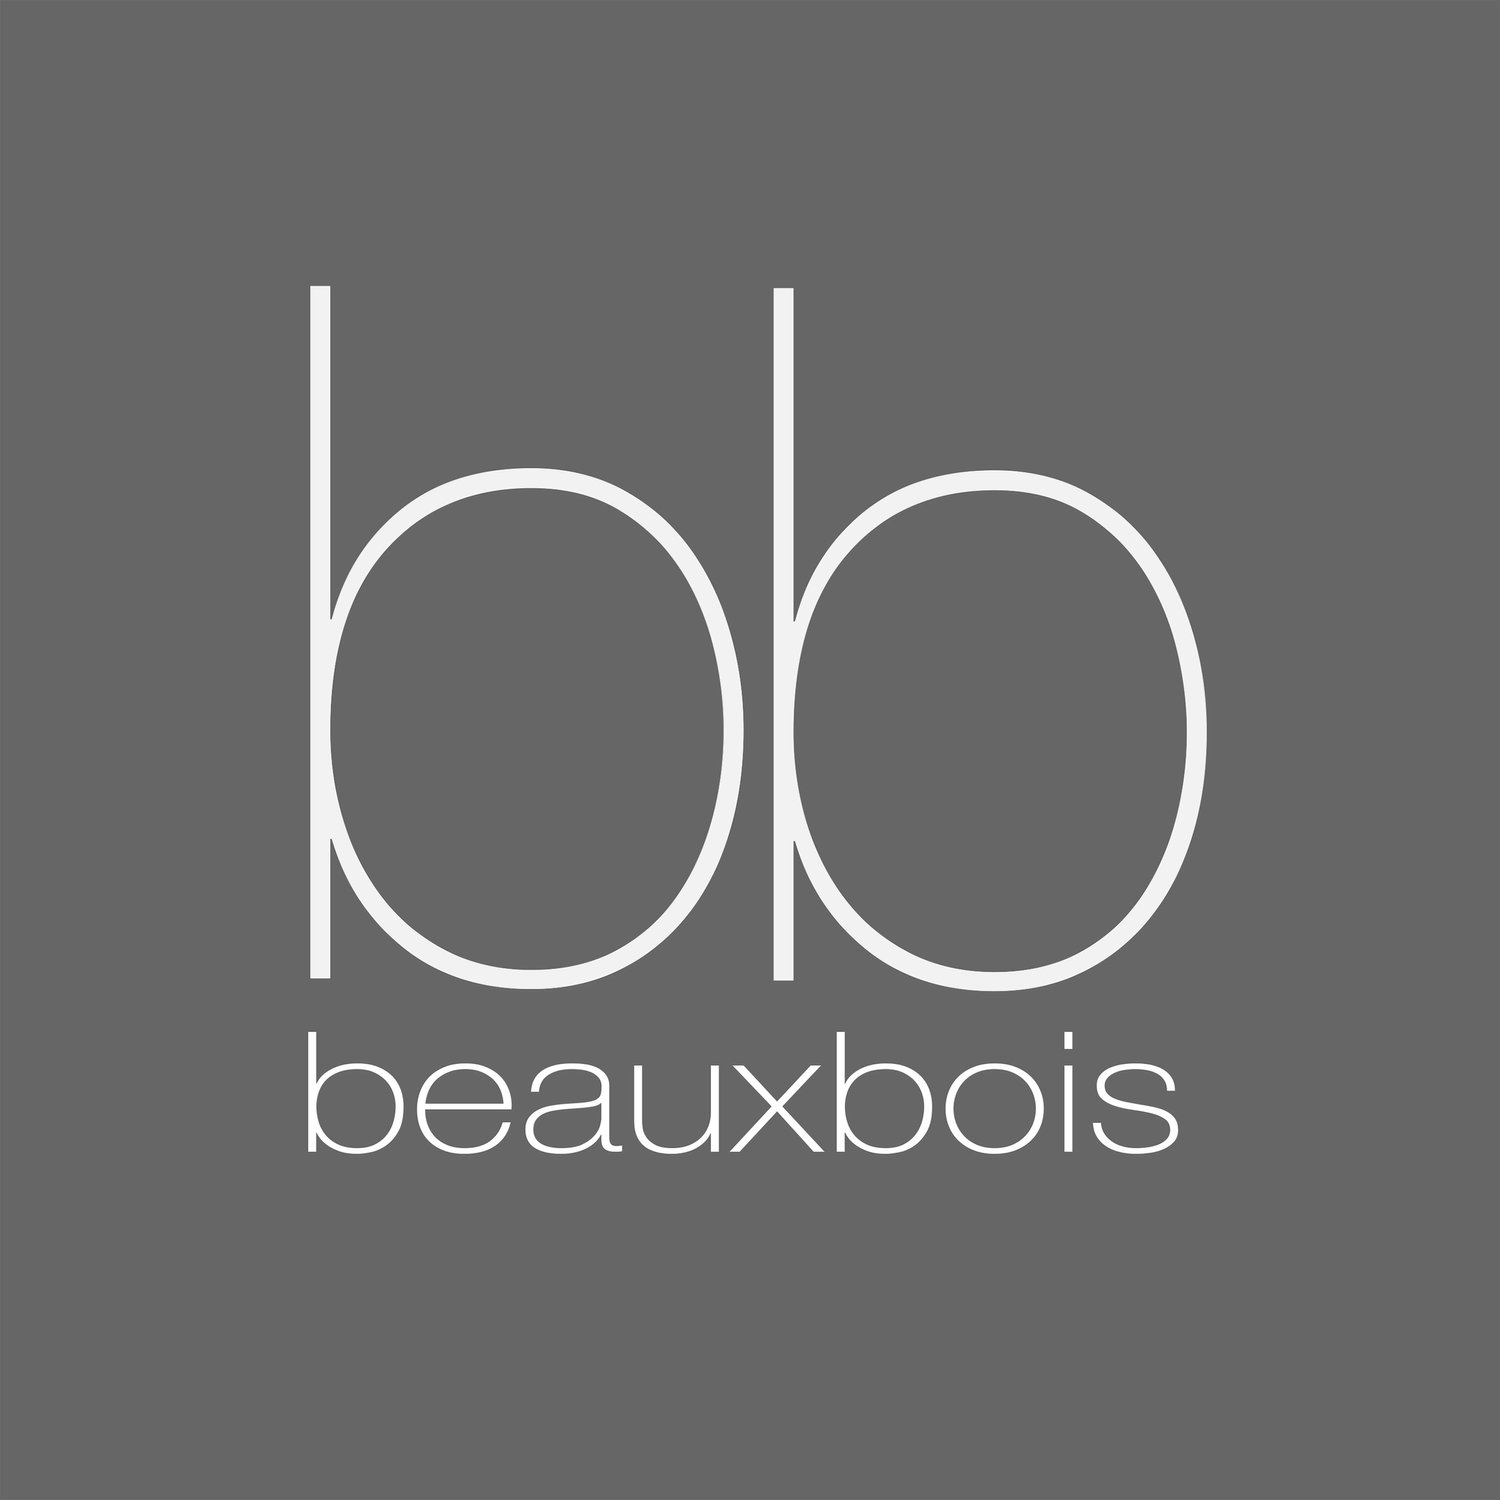 Beauxbois Custom Wood Flooring and Architectural Elements